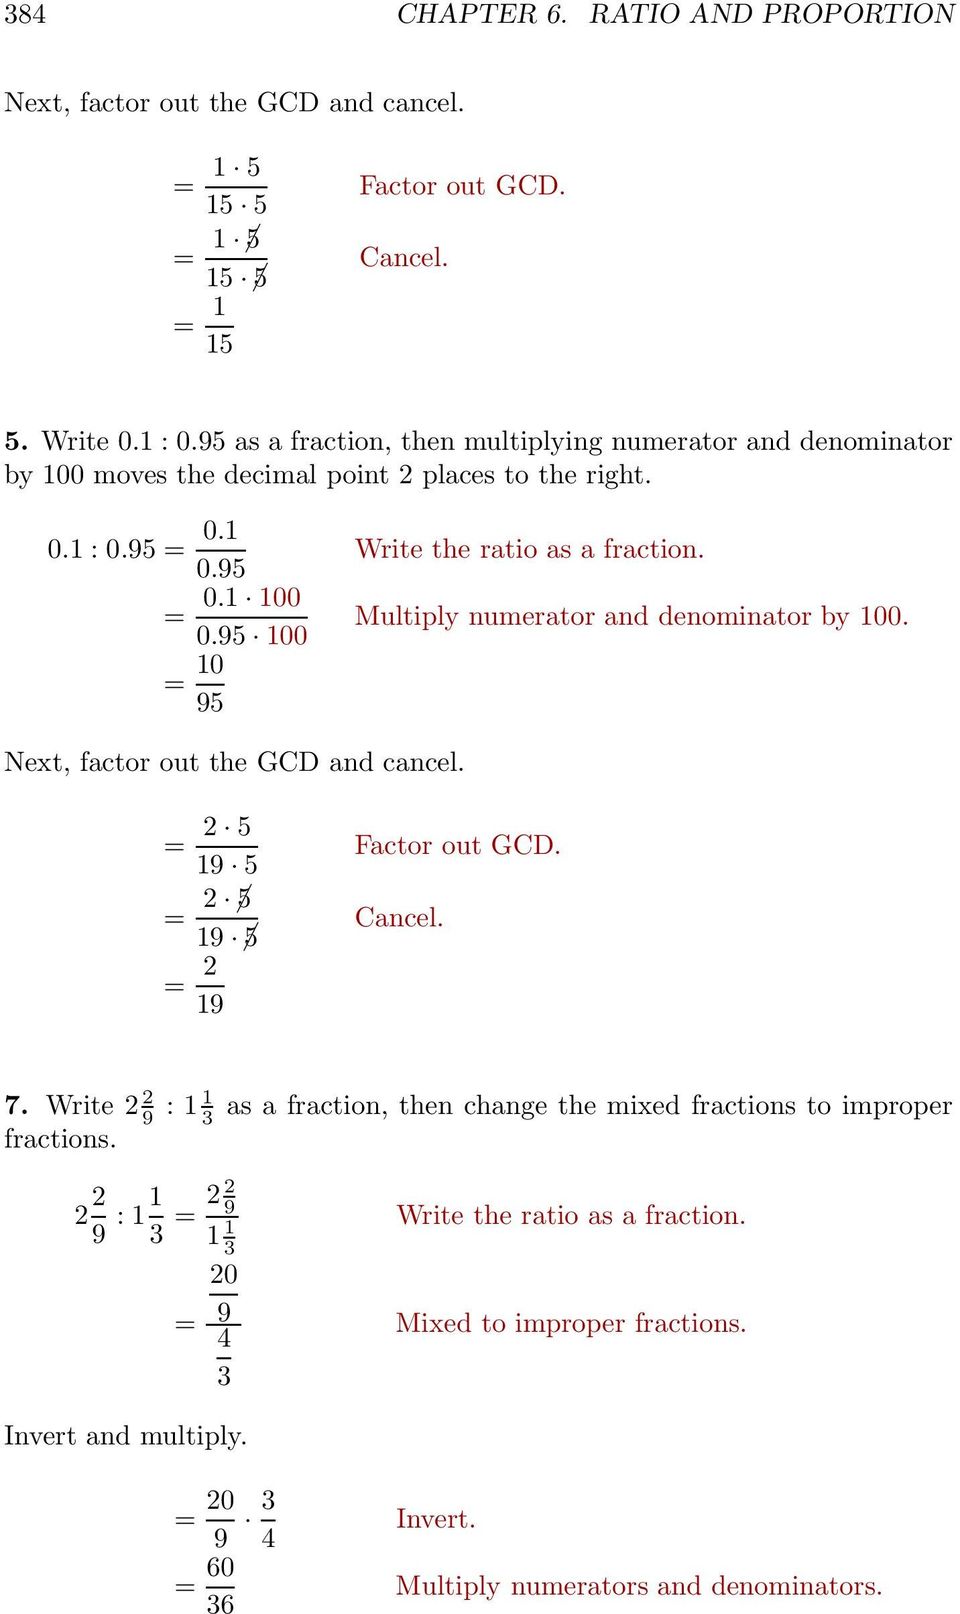 95 100 10 95 Write the ratio as a fraction. Multiply numerator and denominator by 100. Next, factor out the GCD and cancel. 2 5 19 5 2 5 19 5 2 19 Factor out GCD. Cancel. 7.